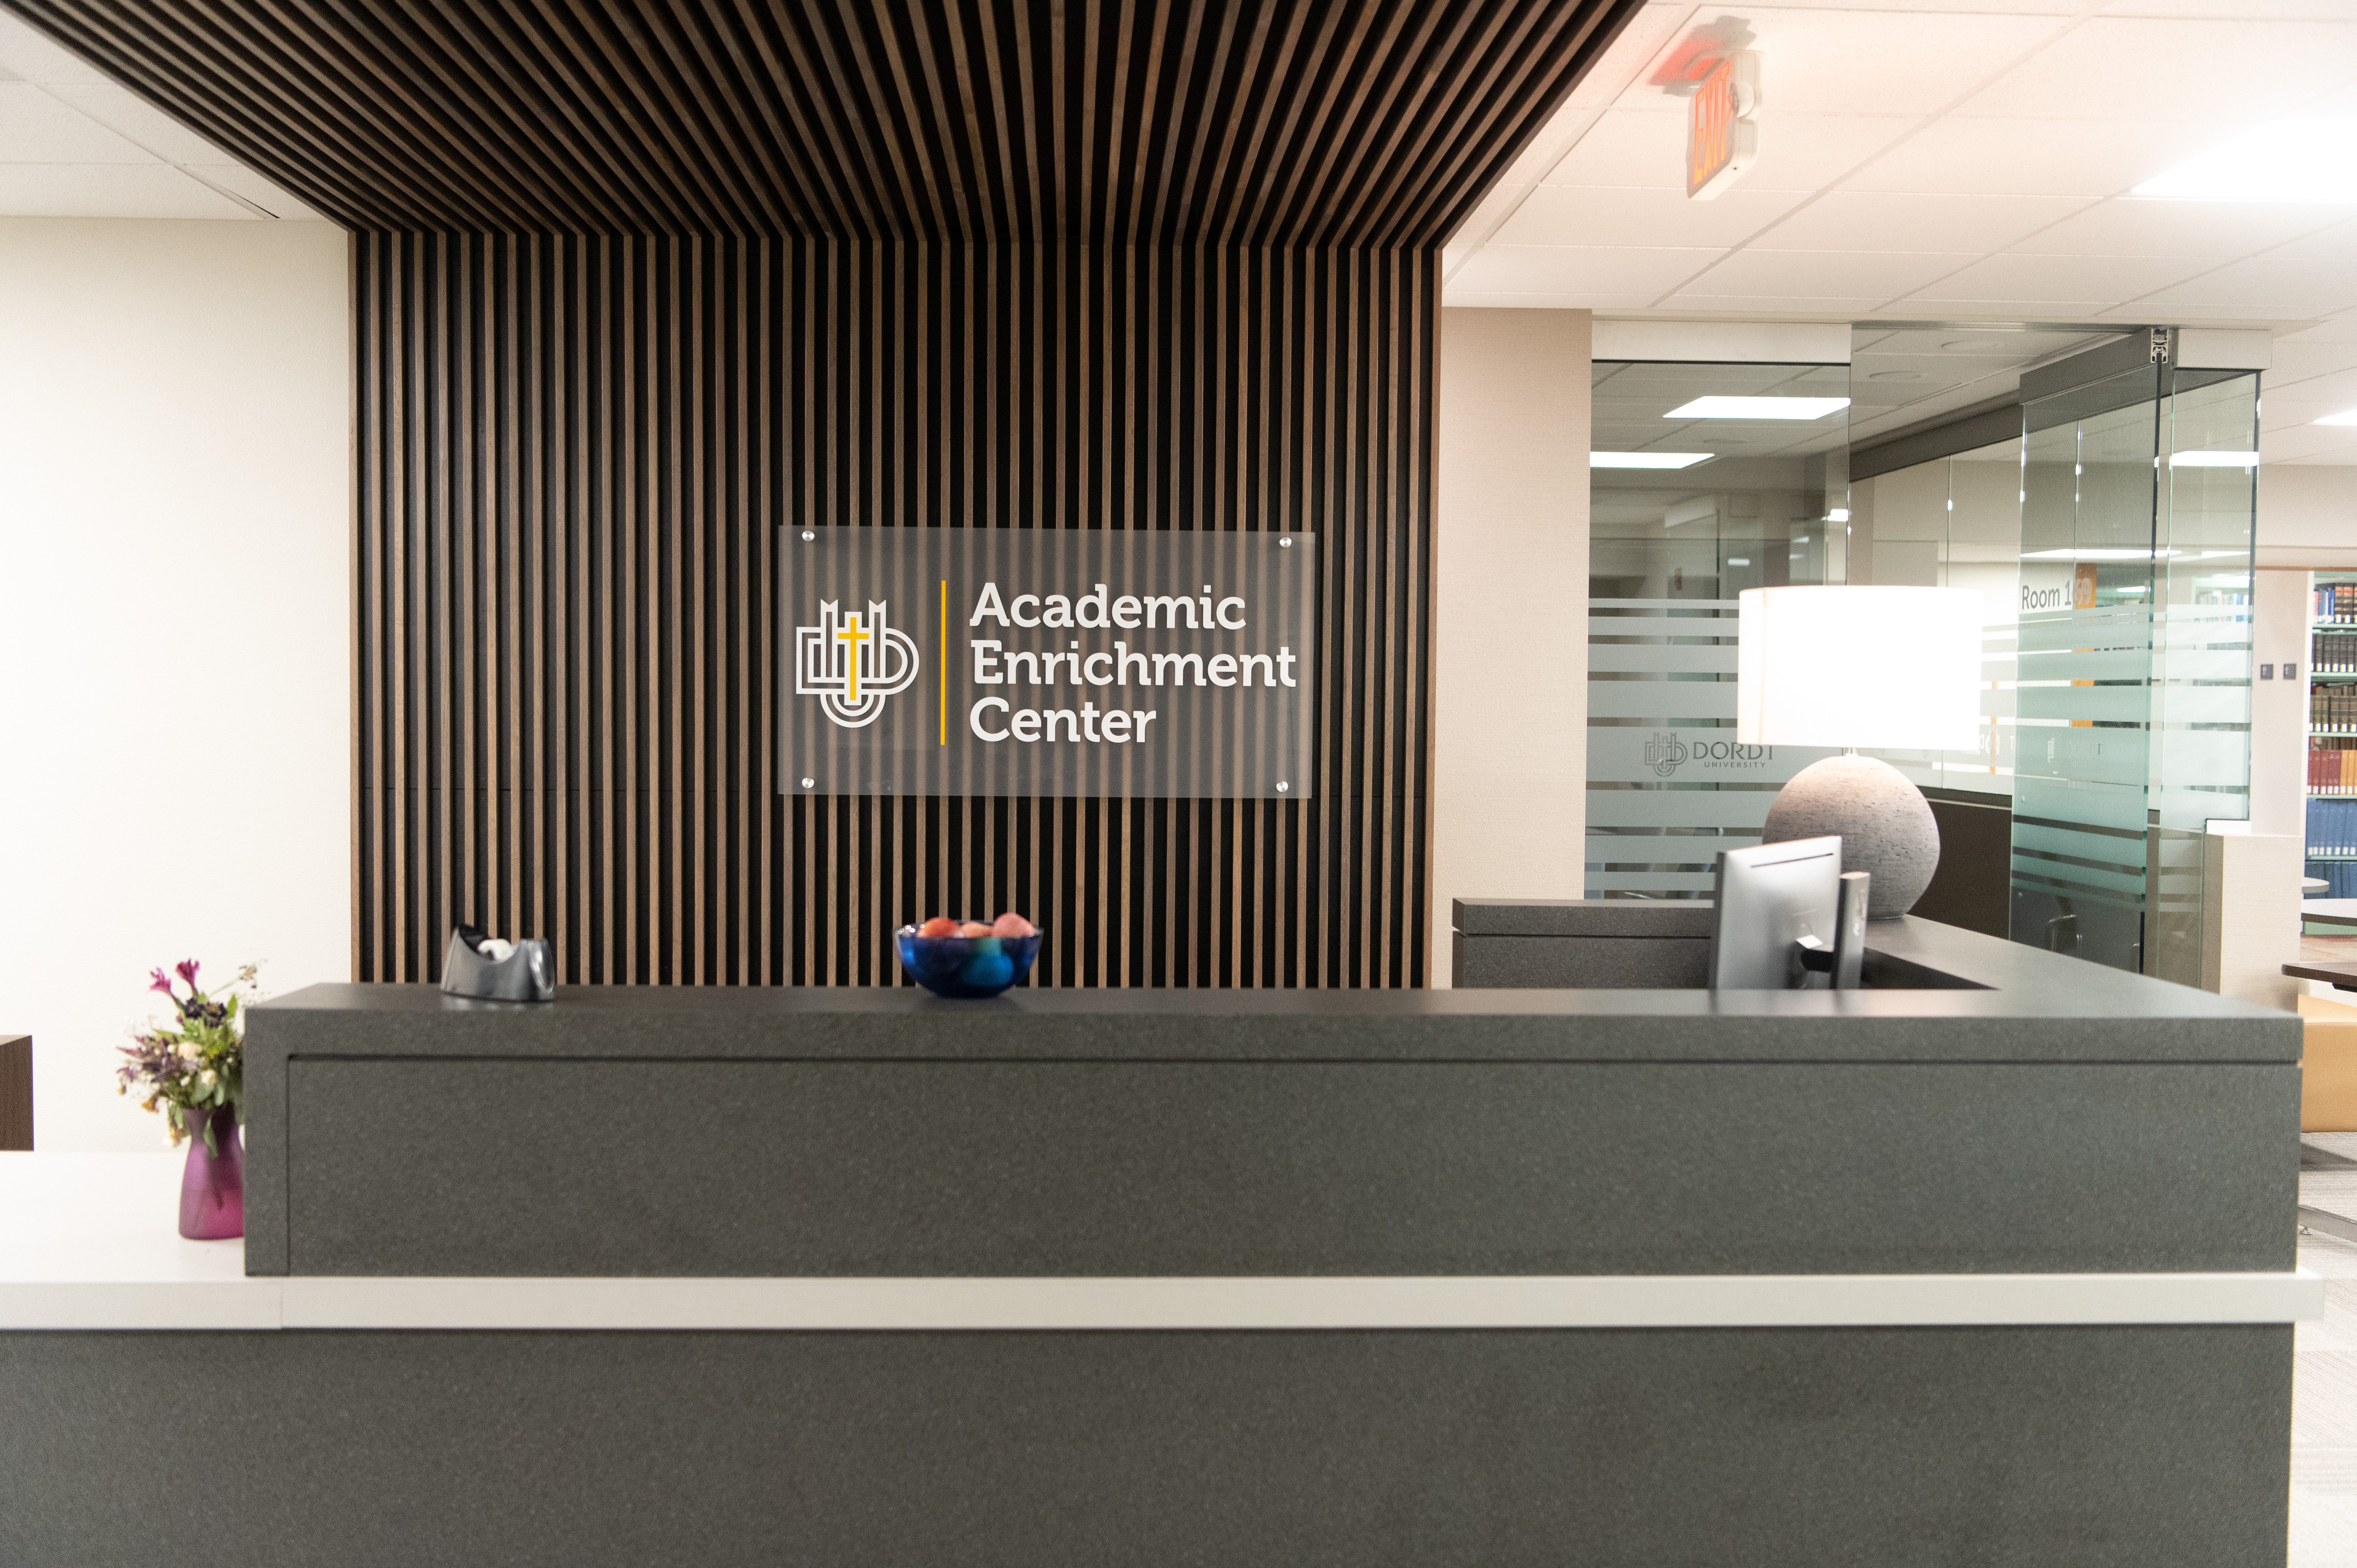 The front desk of the Academic Enrichment Center